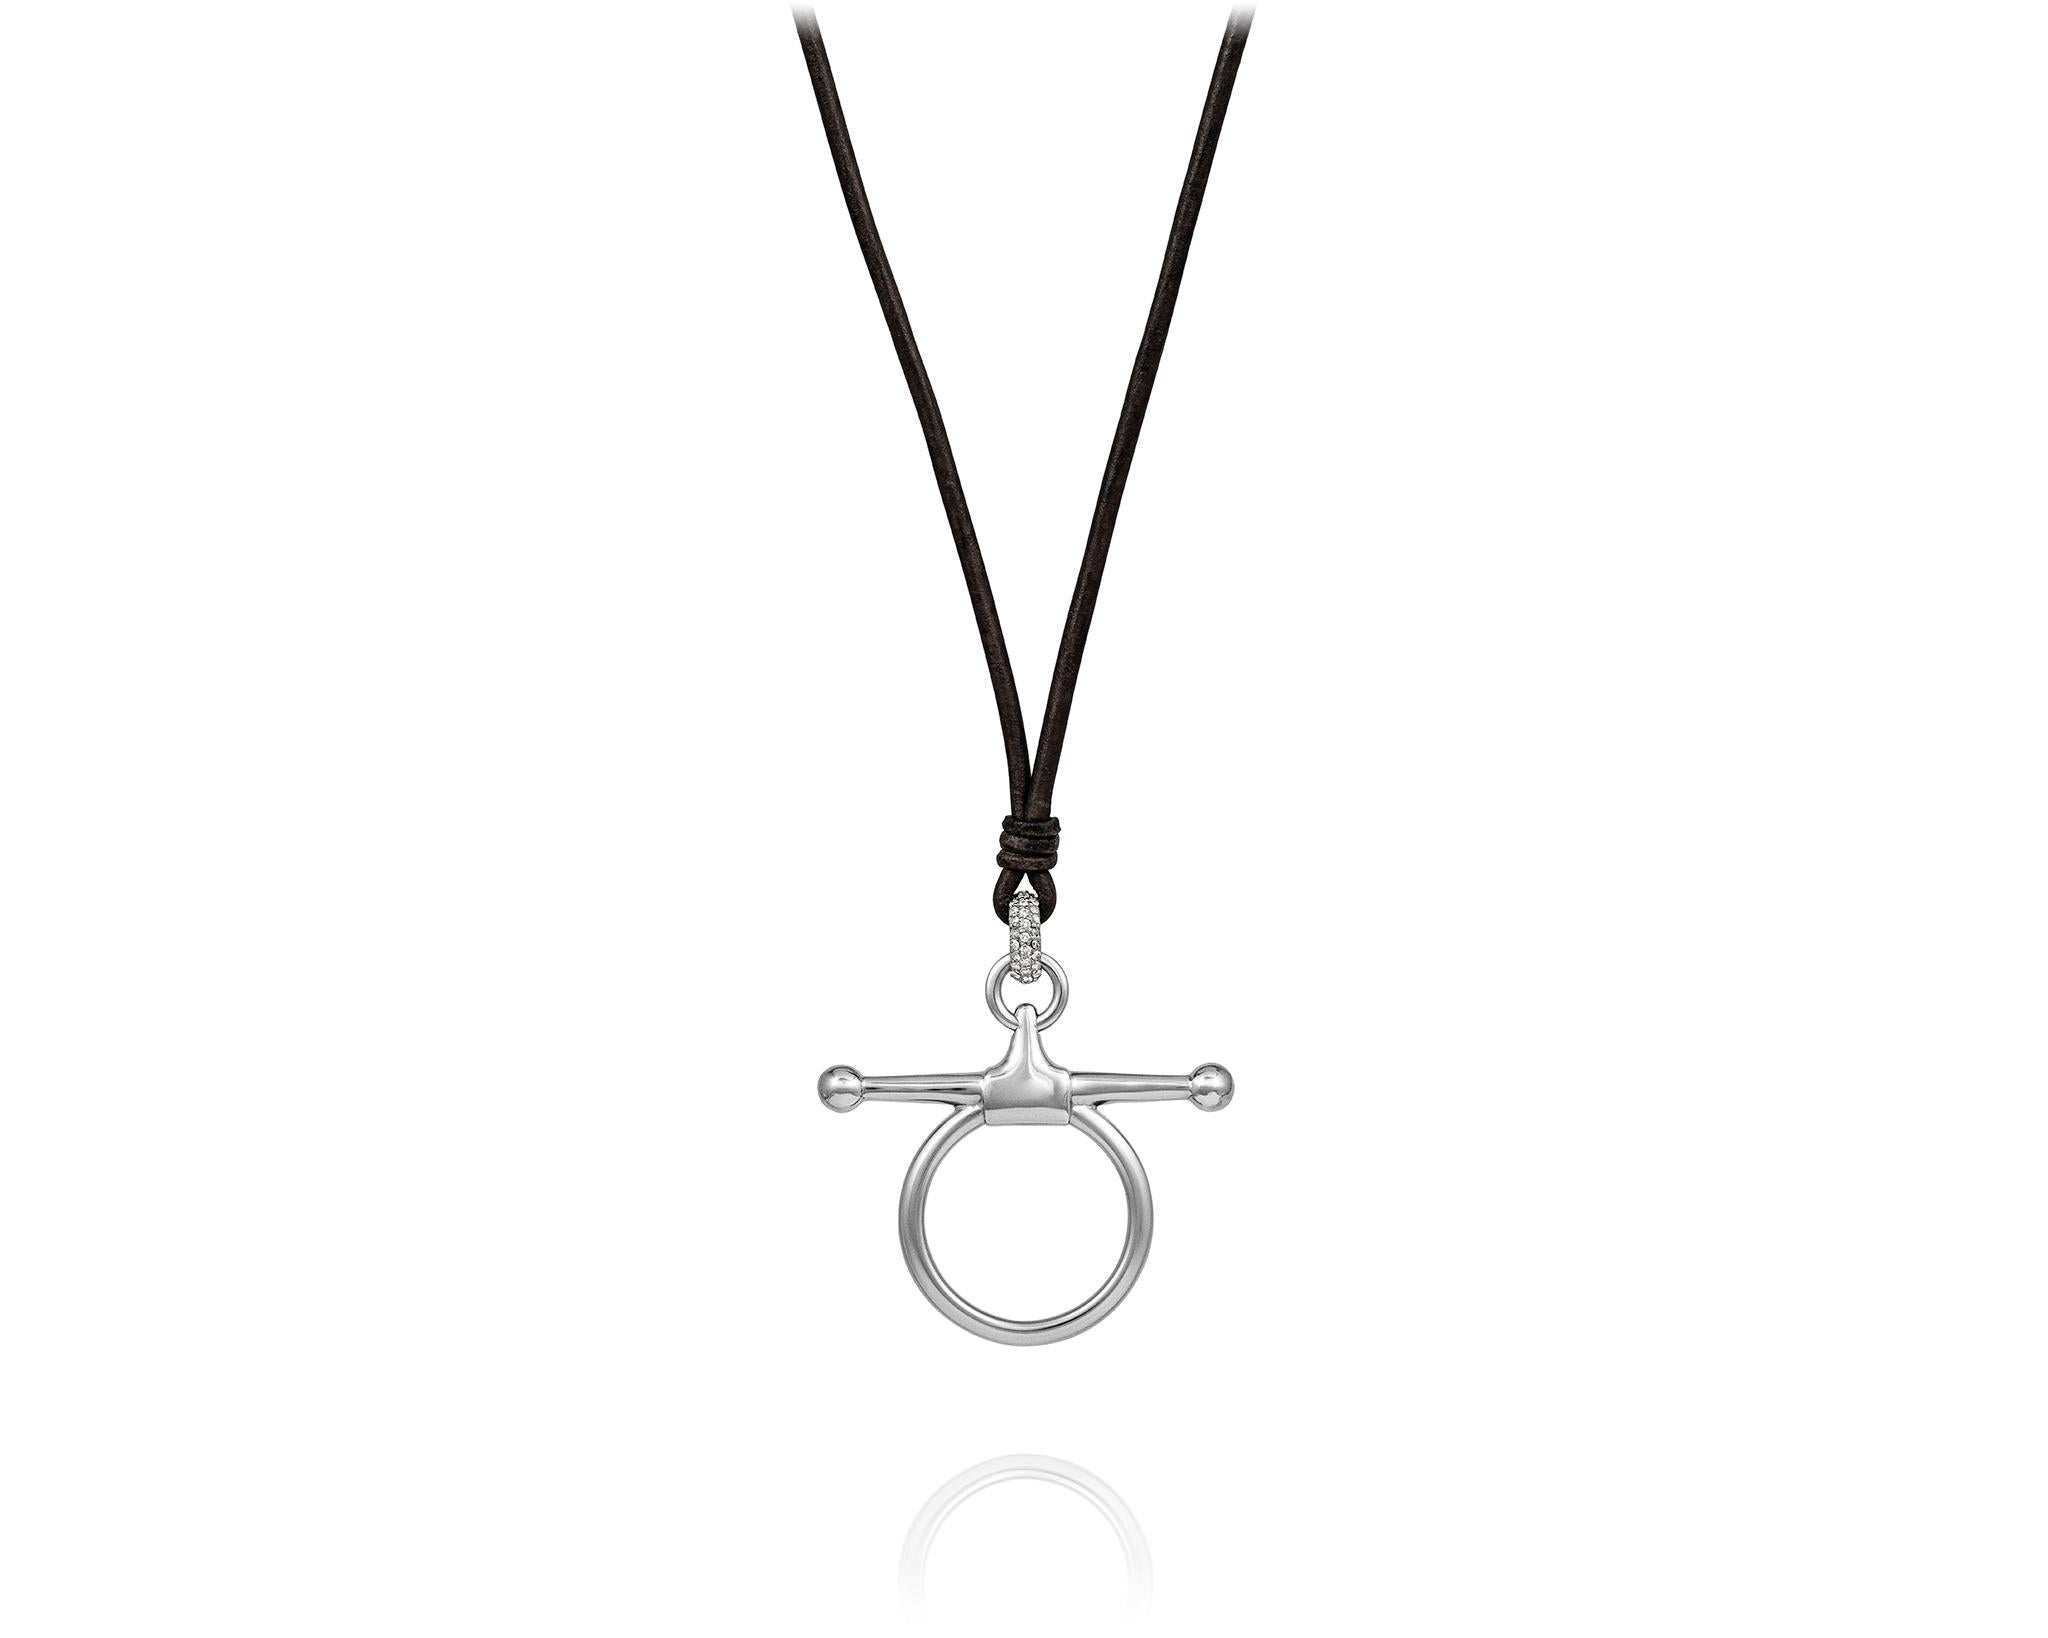 Part of the Vincent Peach Equestrian Collection, the Fulmer Bit Necklace has a Sterling Silver Snaffle Bit Design, set with .15ct Diamonds, on a Premium Brown Leather Cord with a Freshwater Pearl Clasp. Comes in 17